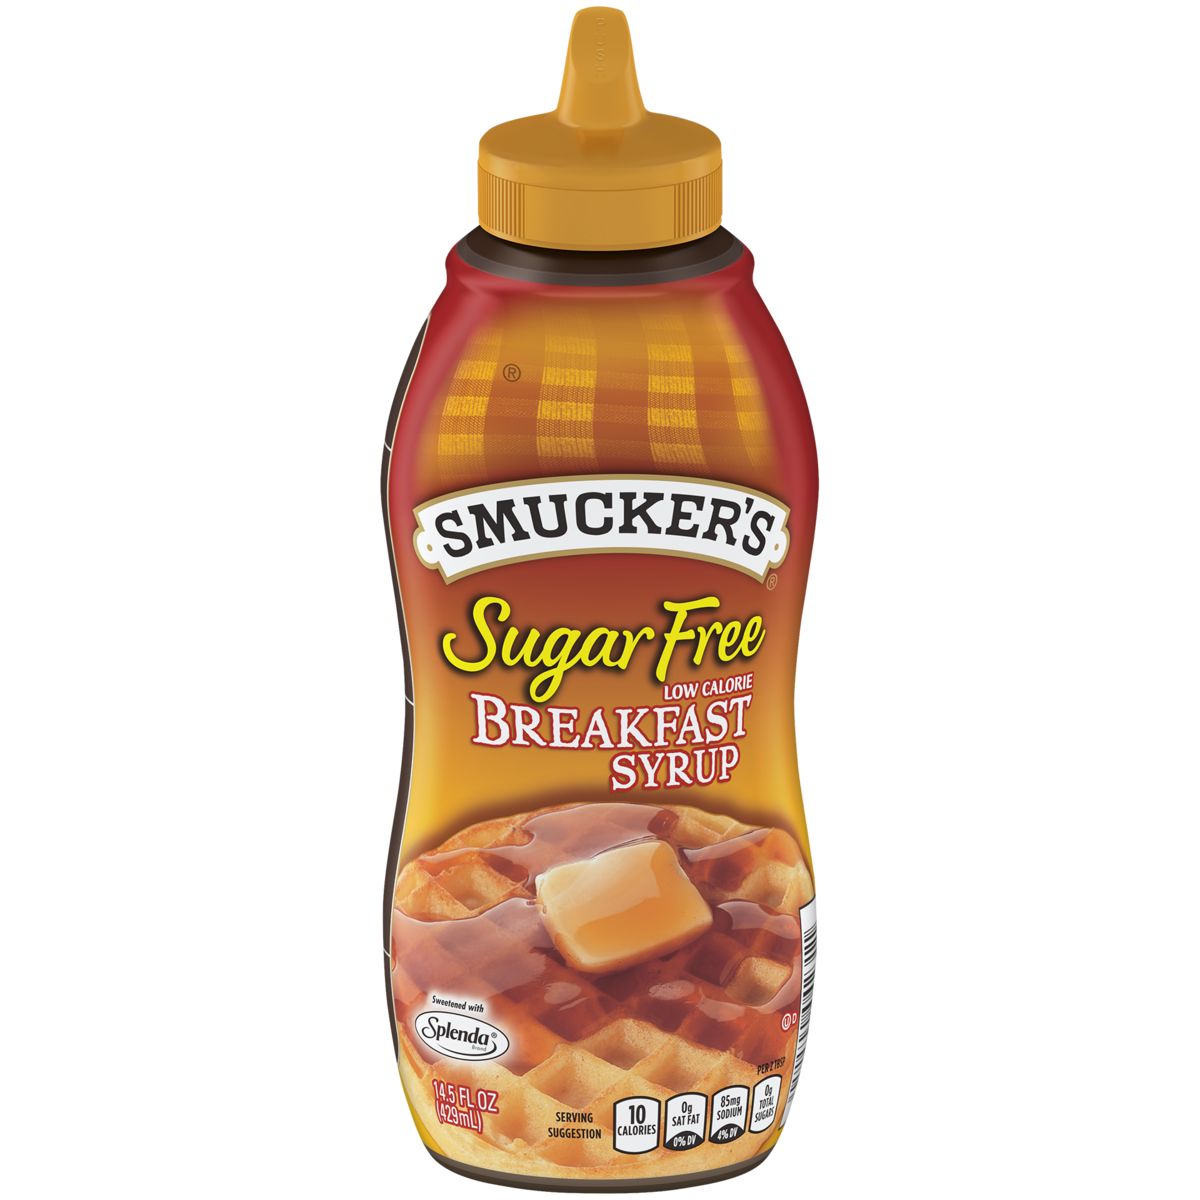 sugar-free-breakfast-syrup-or-smuckers